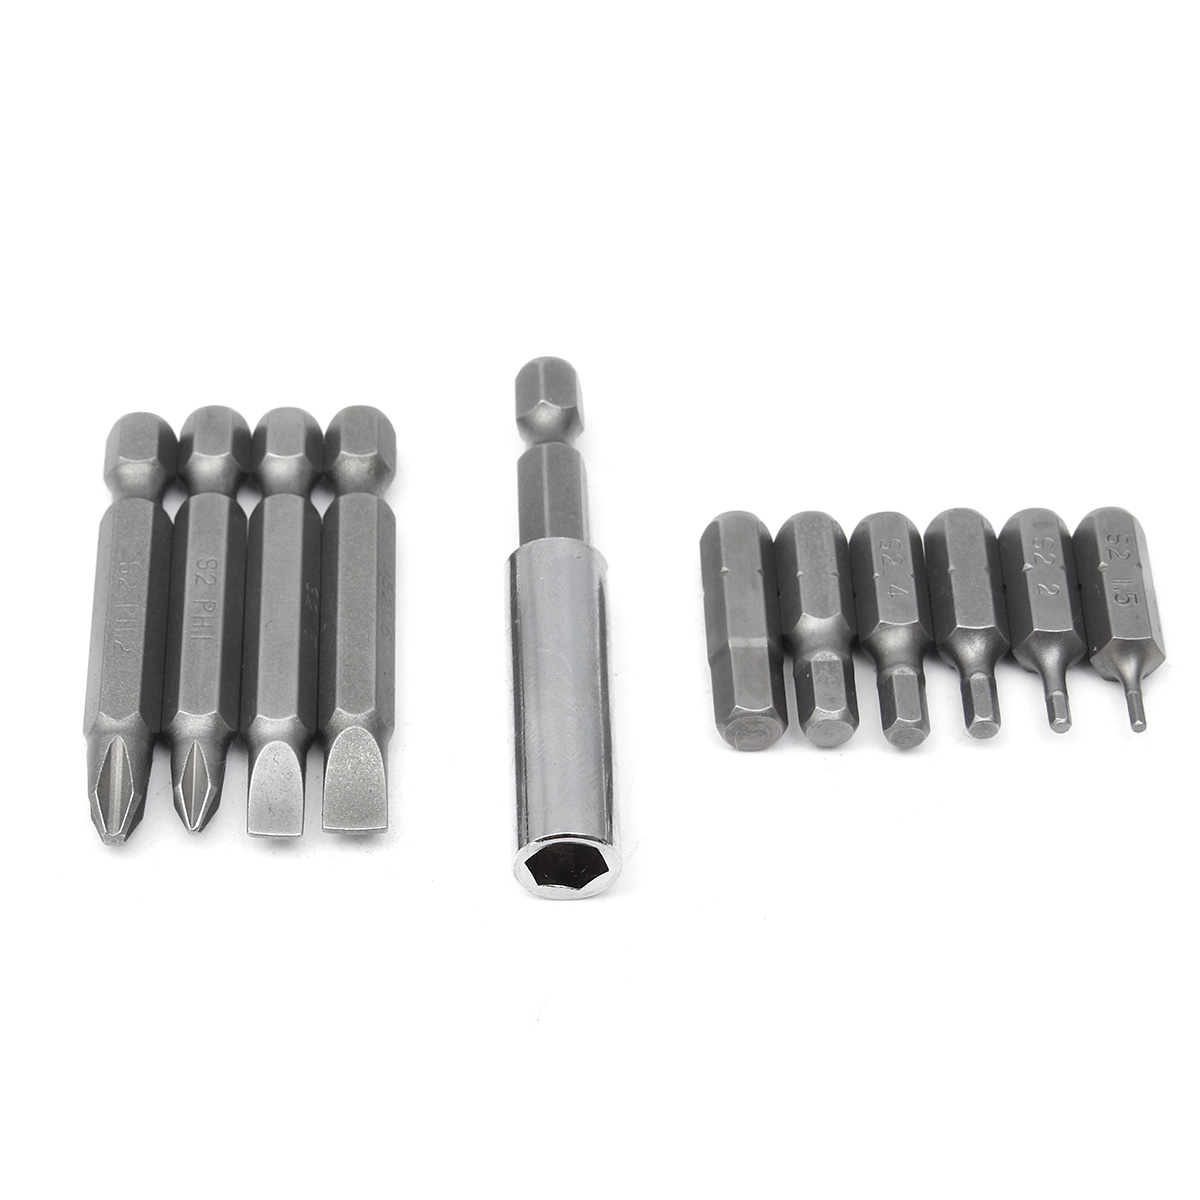 PENGGOOG-0634-11Pcs-Magnetic-Screwdriver-Bits-Slotted-Phillips-Torx-S2-Alloy-Steel-H6-Electric-Screw-1147177-2